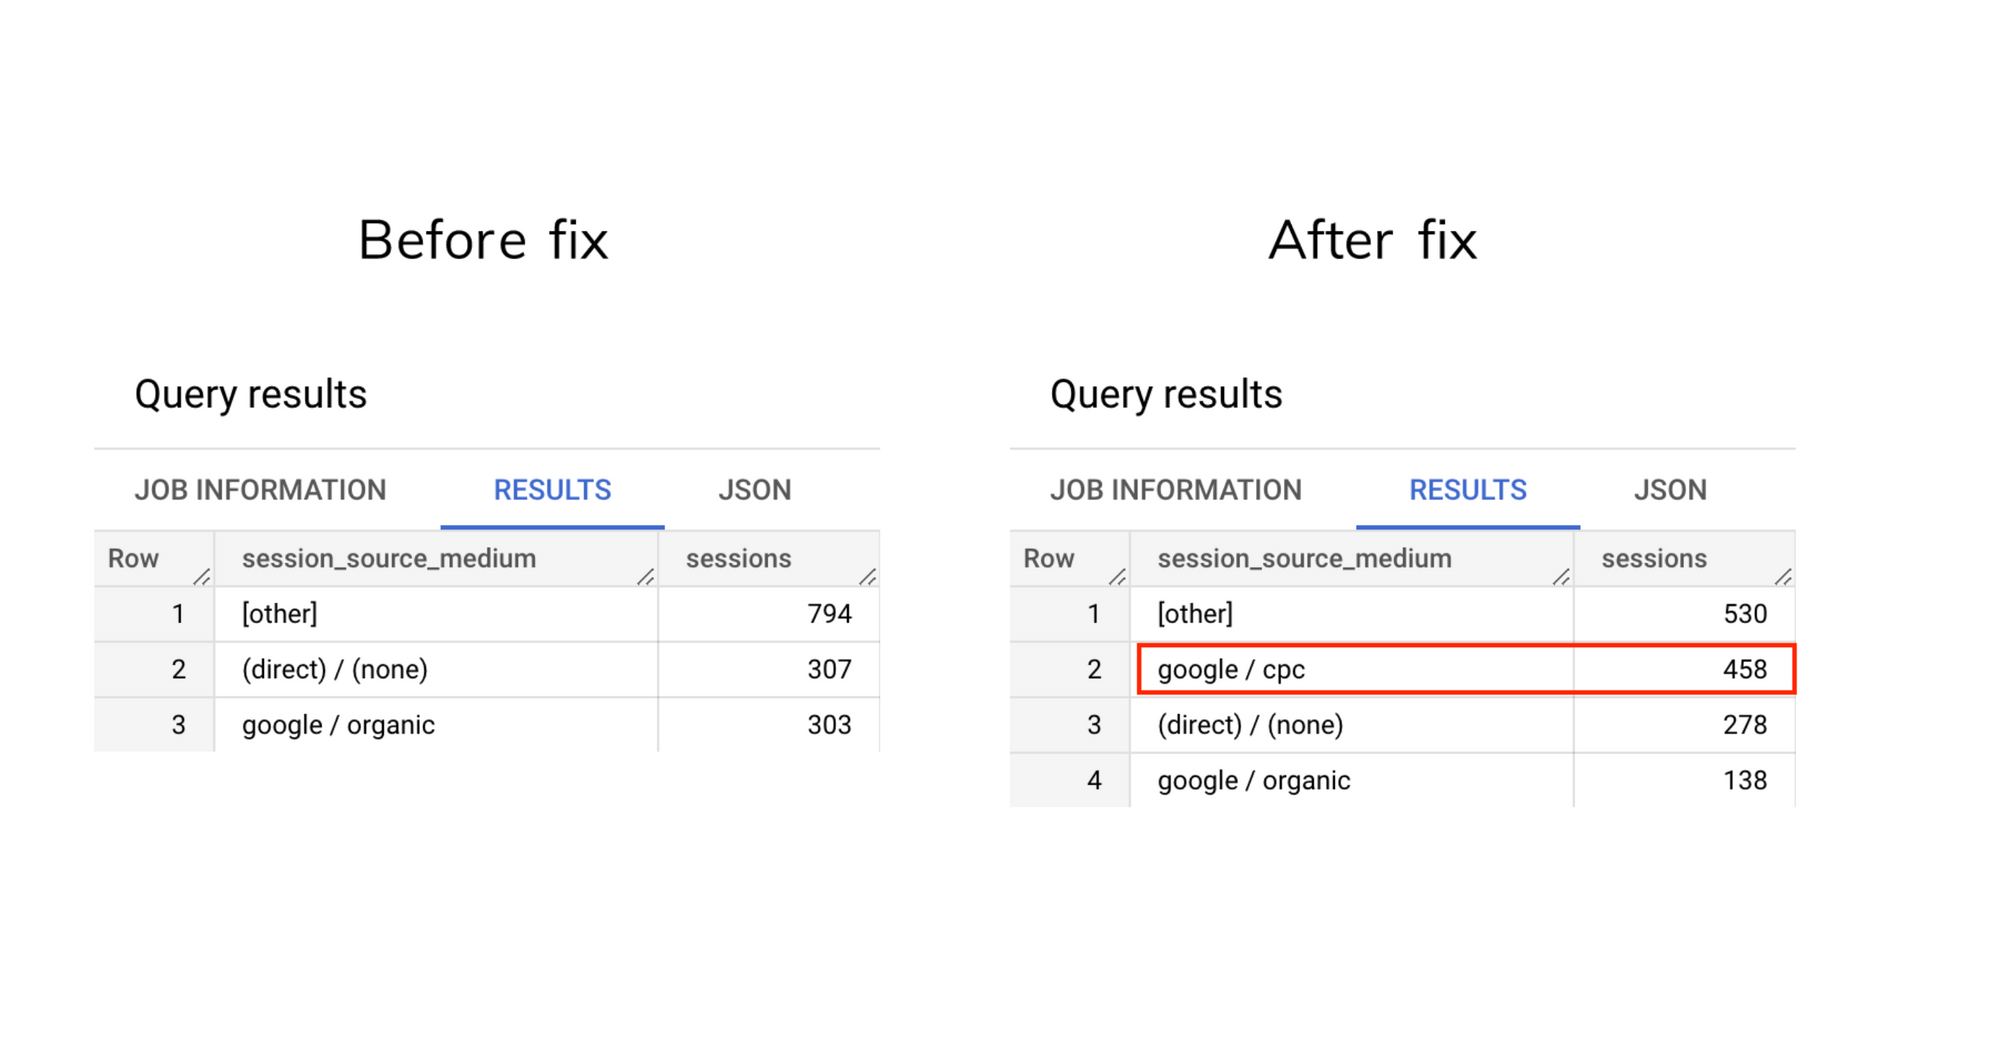 How to fix the major GA4 BigQuery export misattribution bug where paid search events and sessions are mistaken for organic or direct traffic